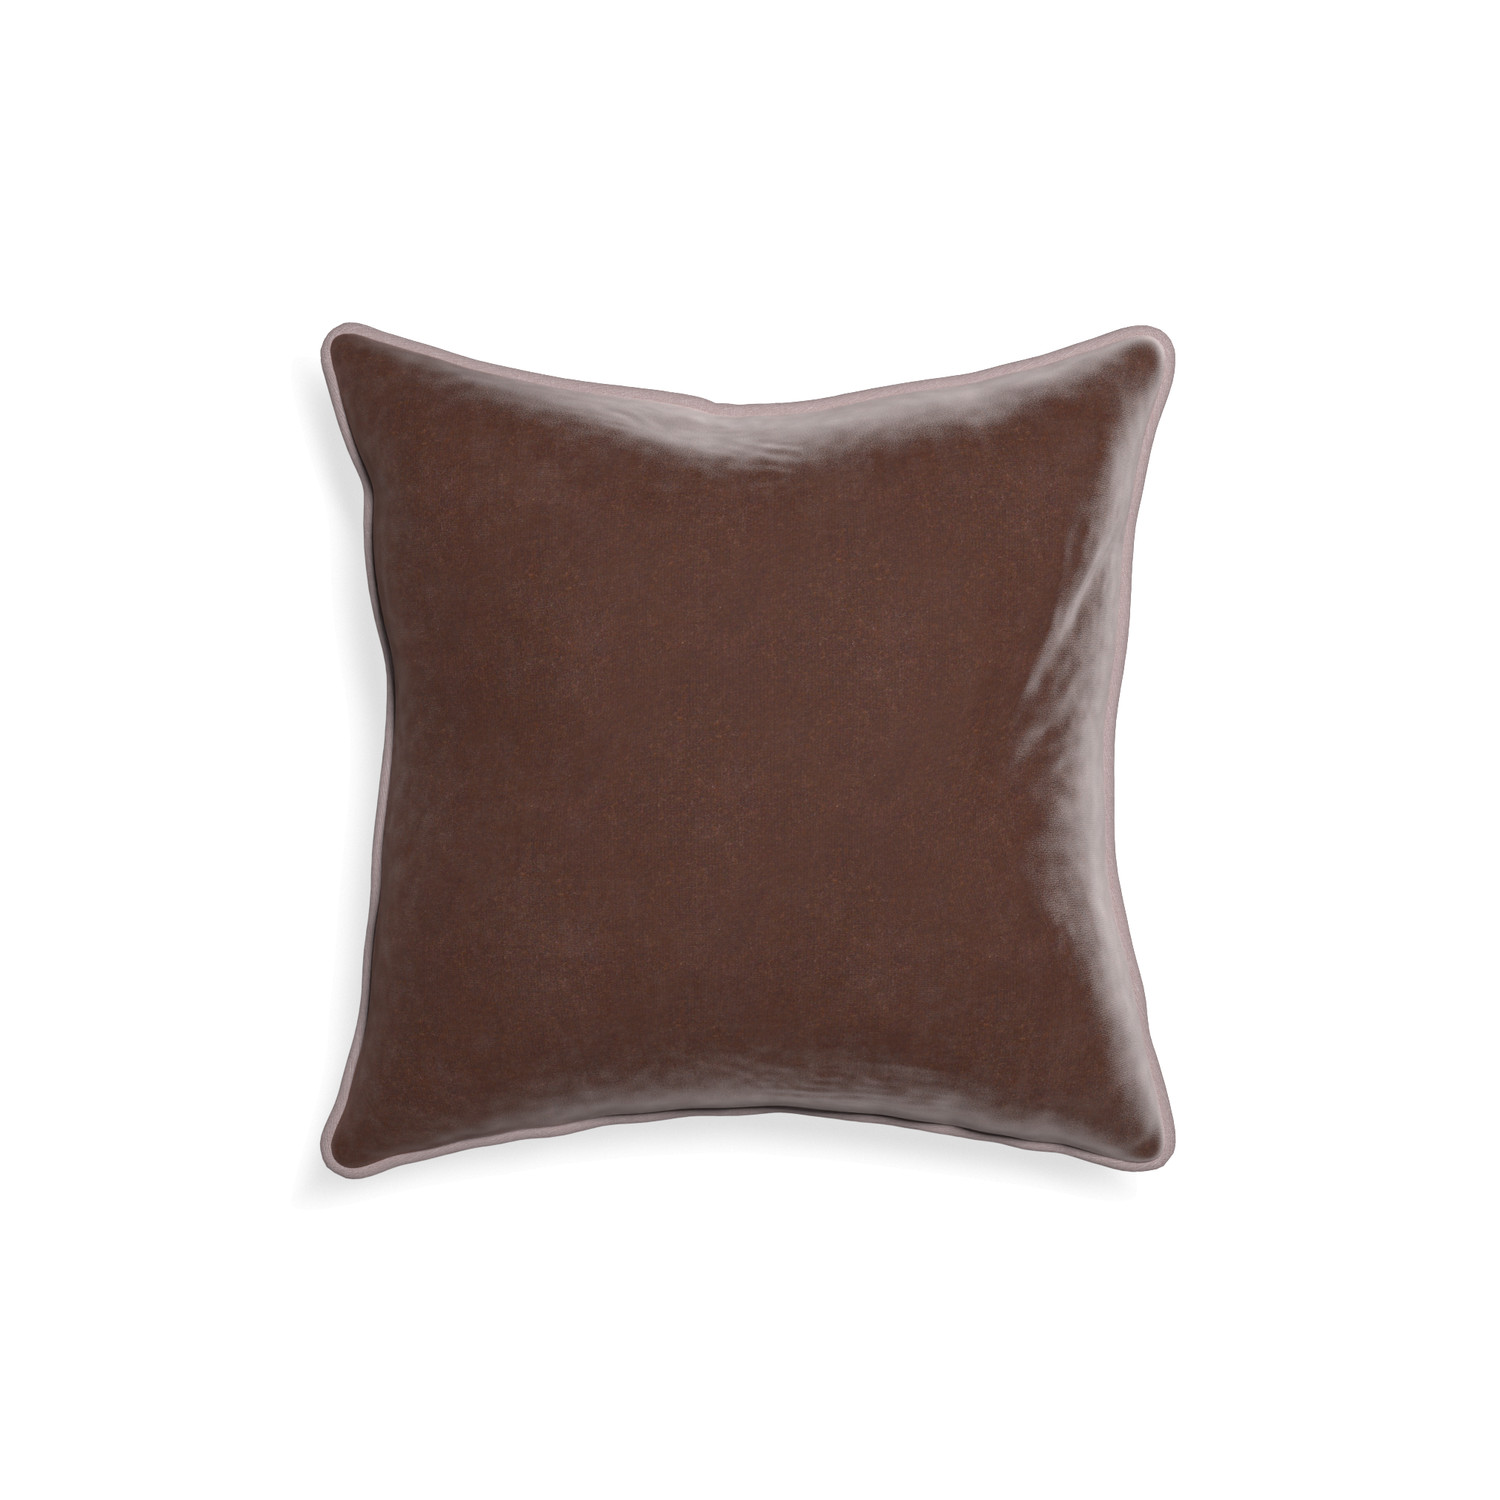 18-square walnut velvet custom brownpillow with orchid piping on white background